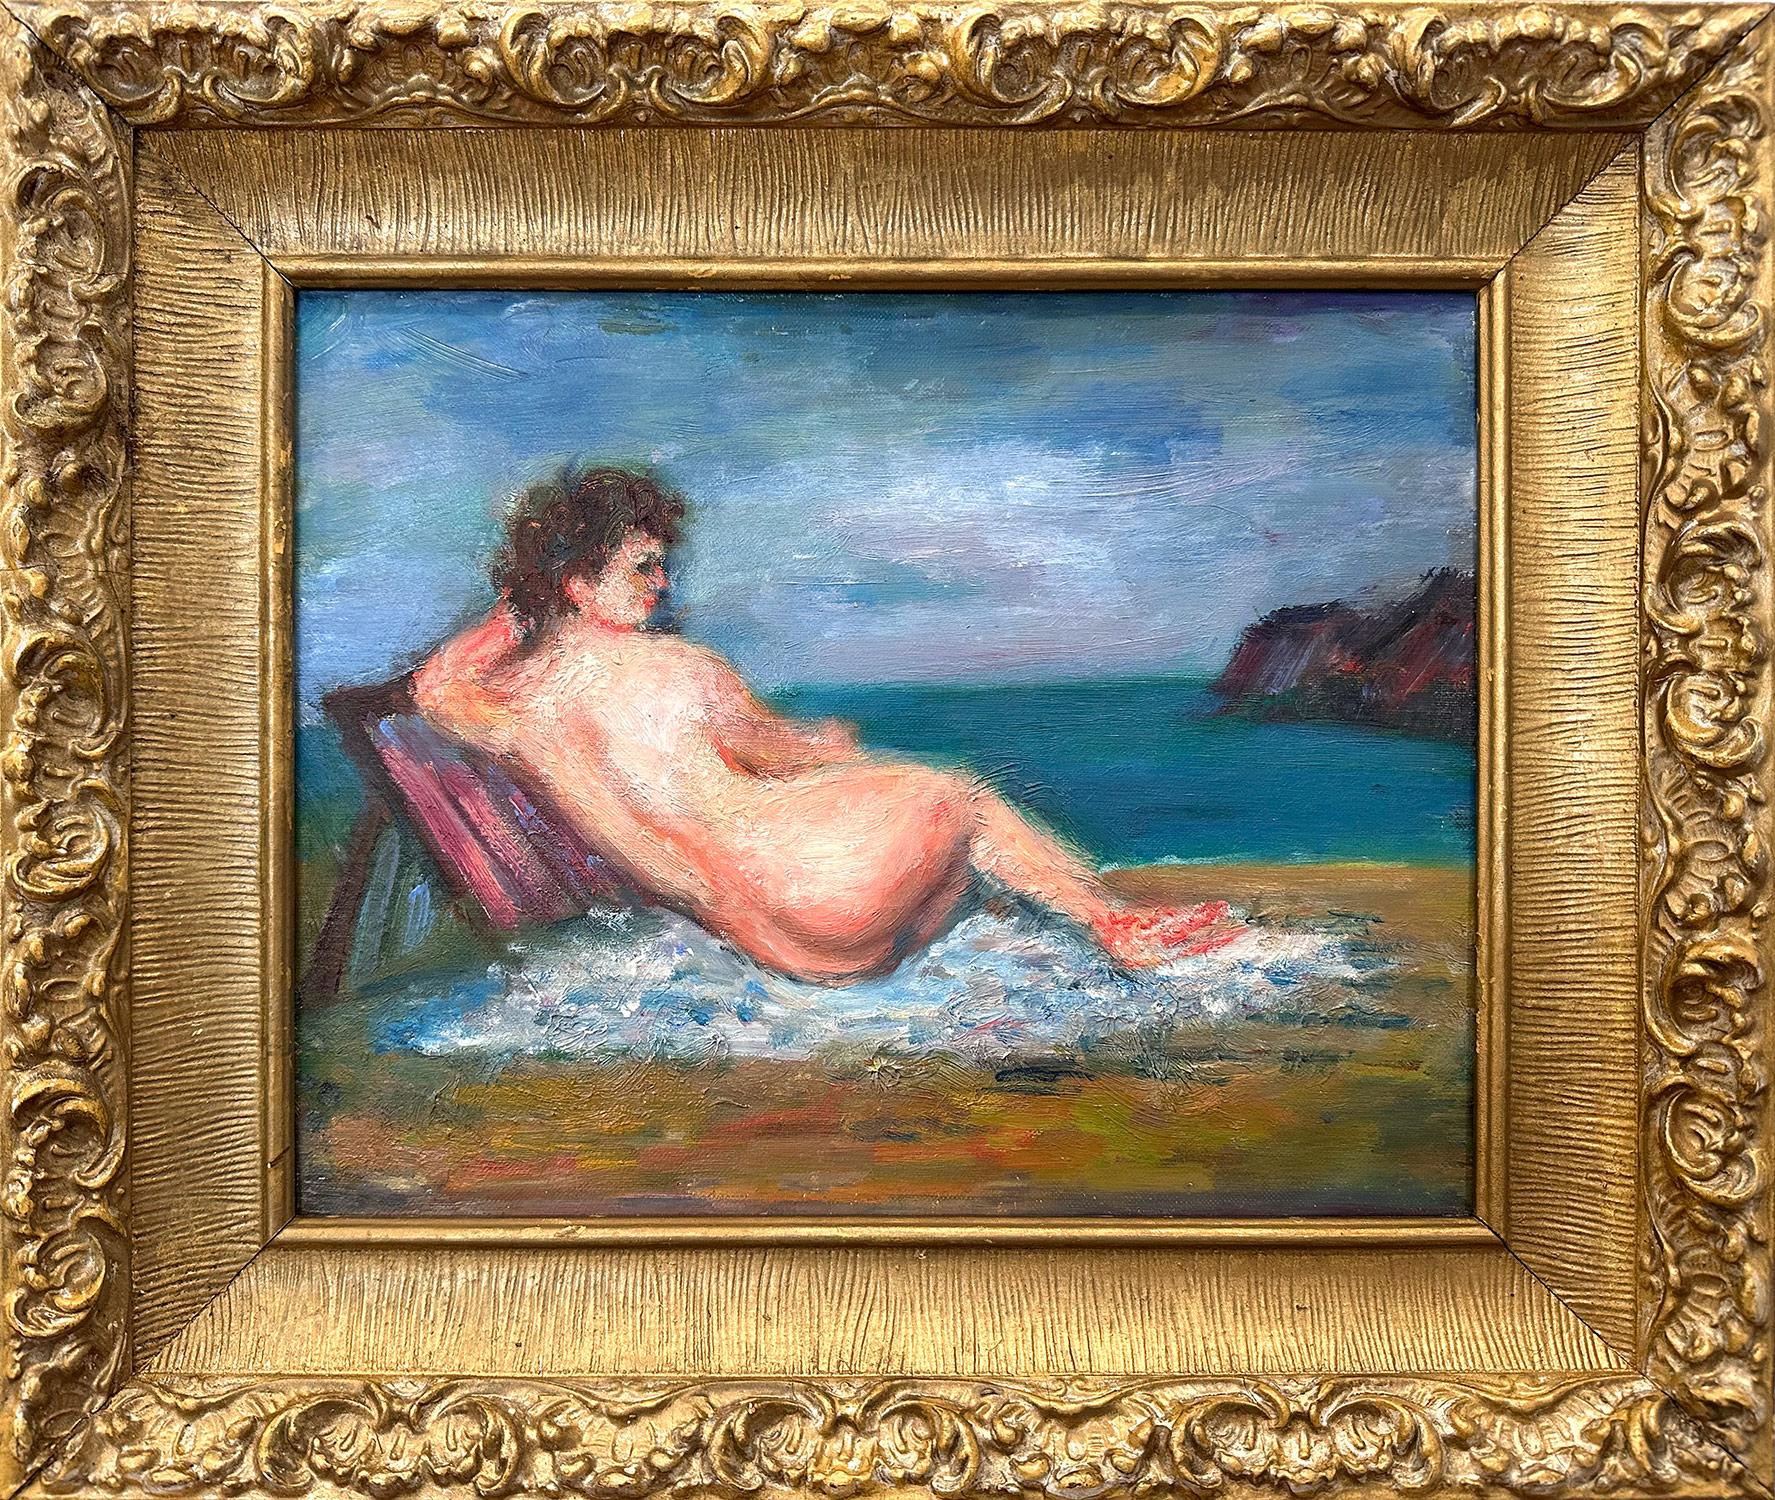 Jacques Zucker Landscape Painting - "Sun Bather by the Shore" Post-Impressionist Nude Oil Painting on Canvas Framed